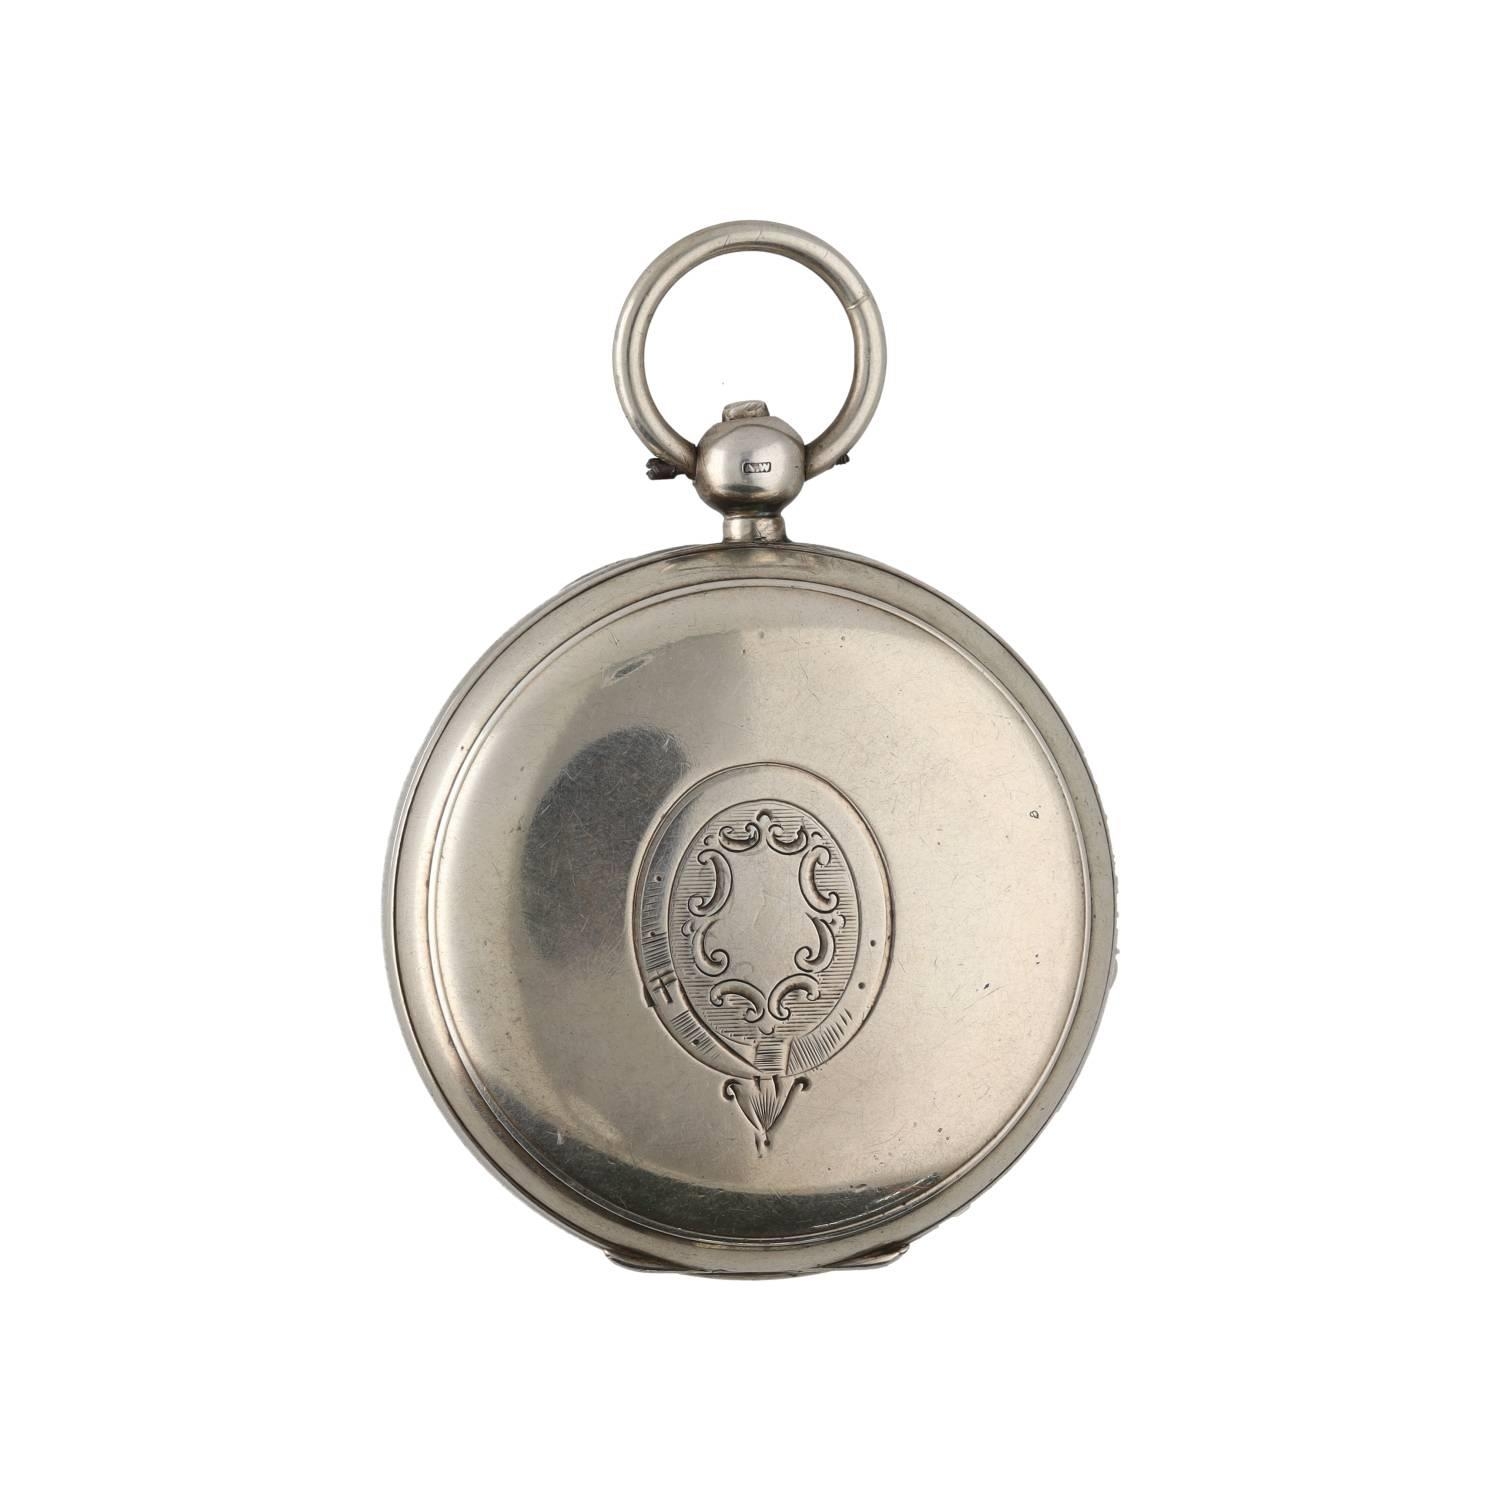 Elgin National Watch Co. silver lever pocket watch, circa 1877, serial no. 546300, signed movement - Image 3 of 3